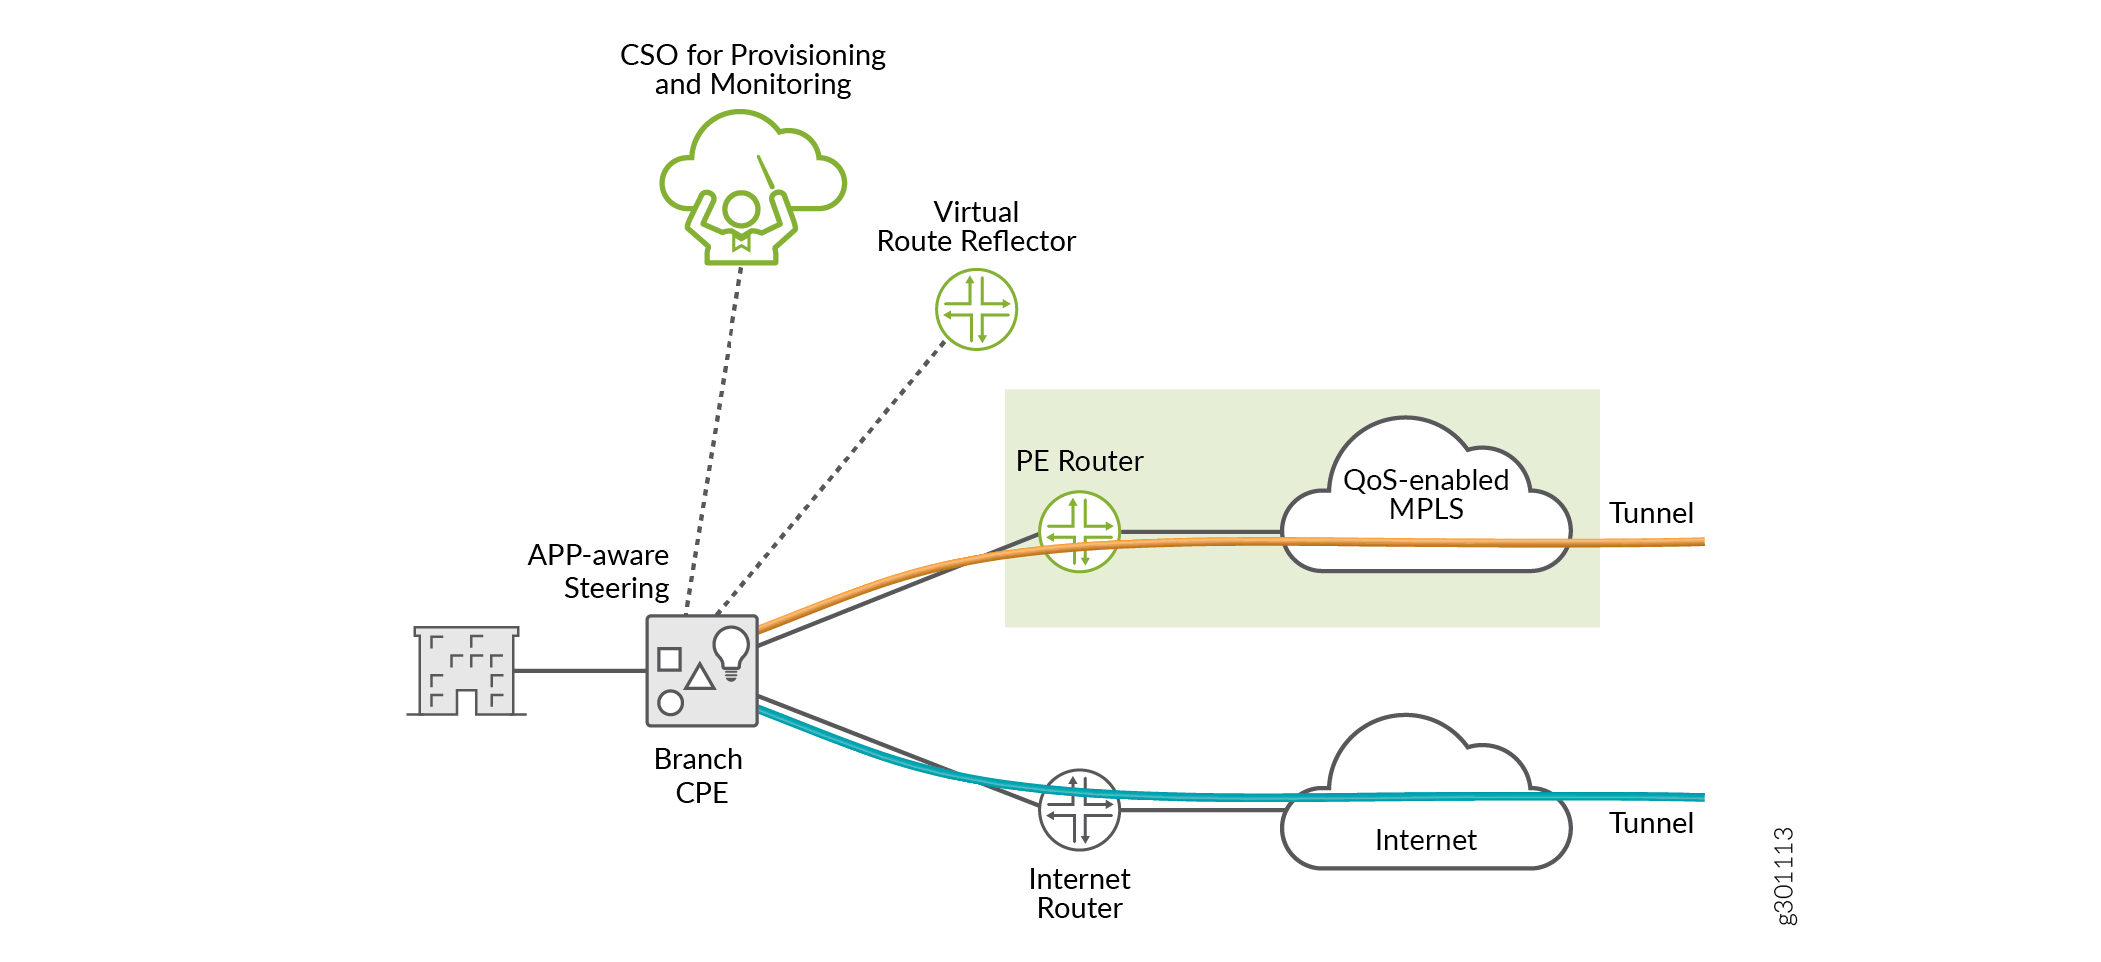 Branch Management
With SD-WAN